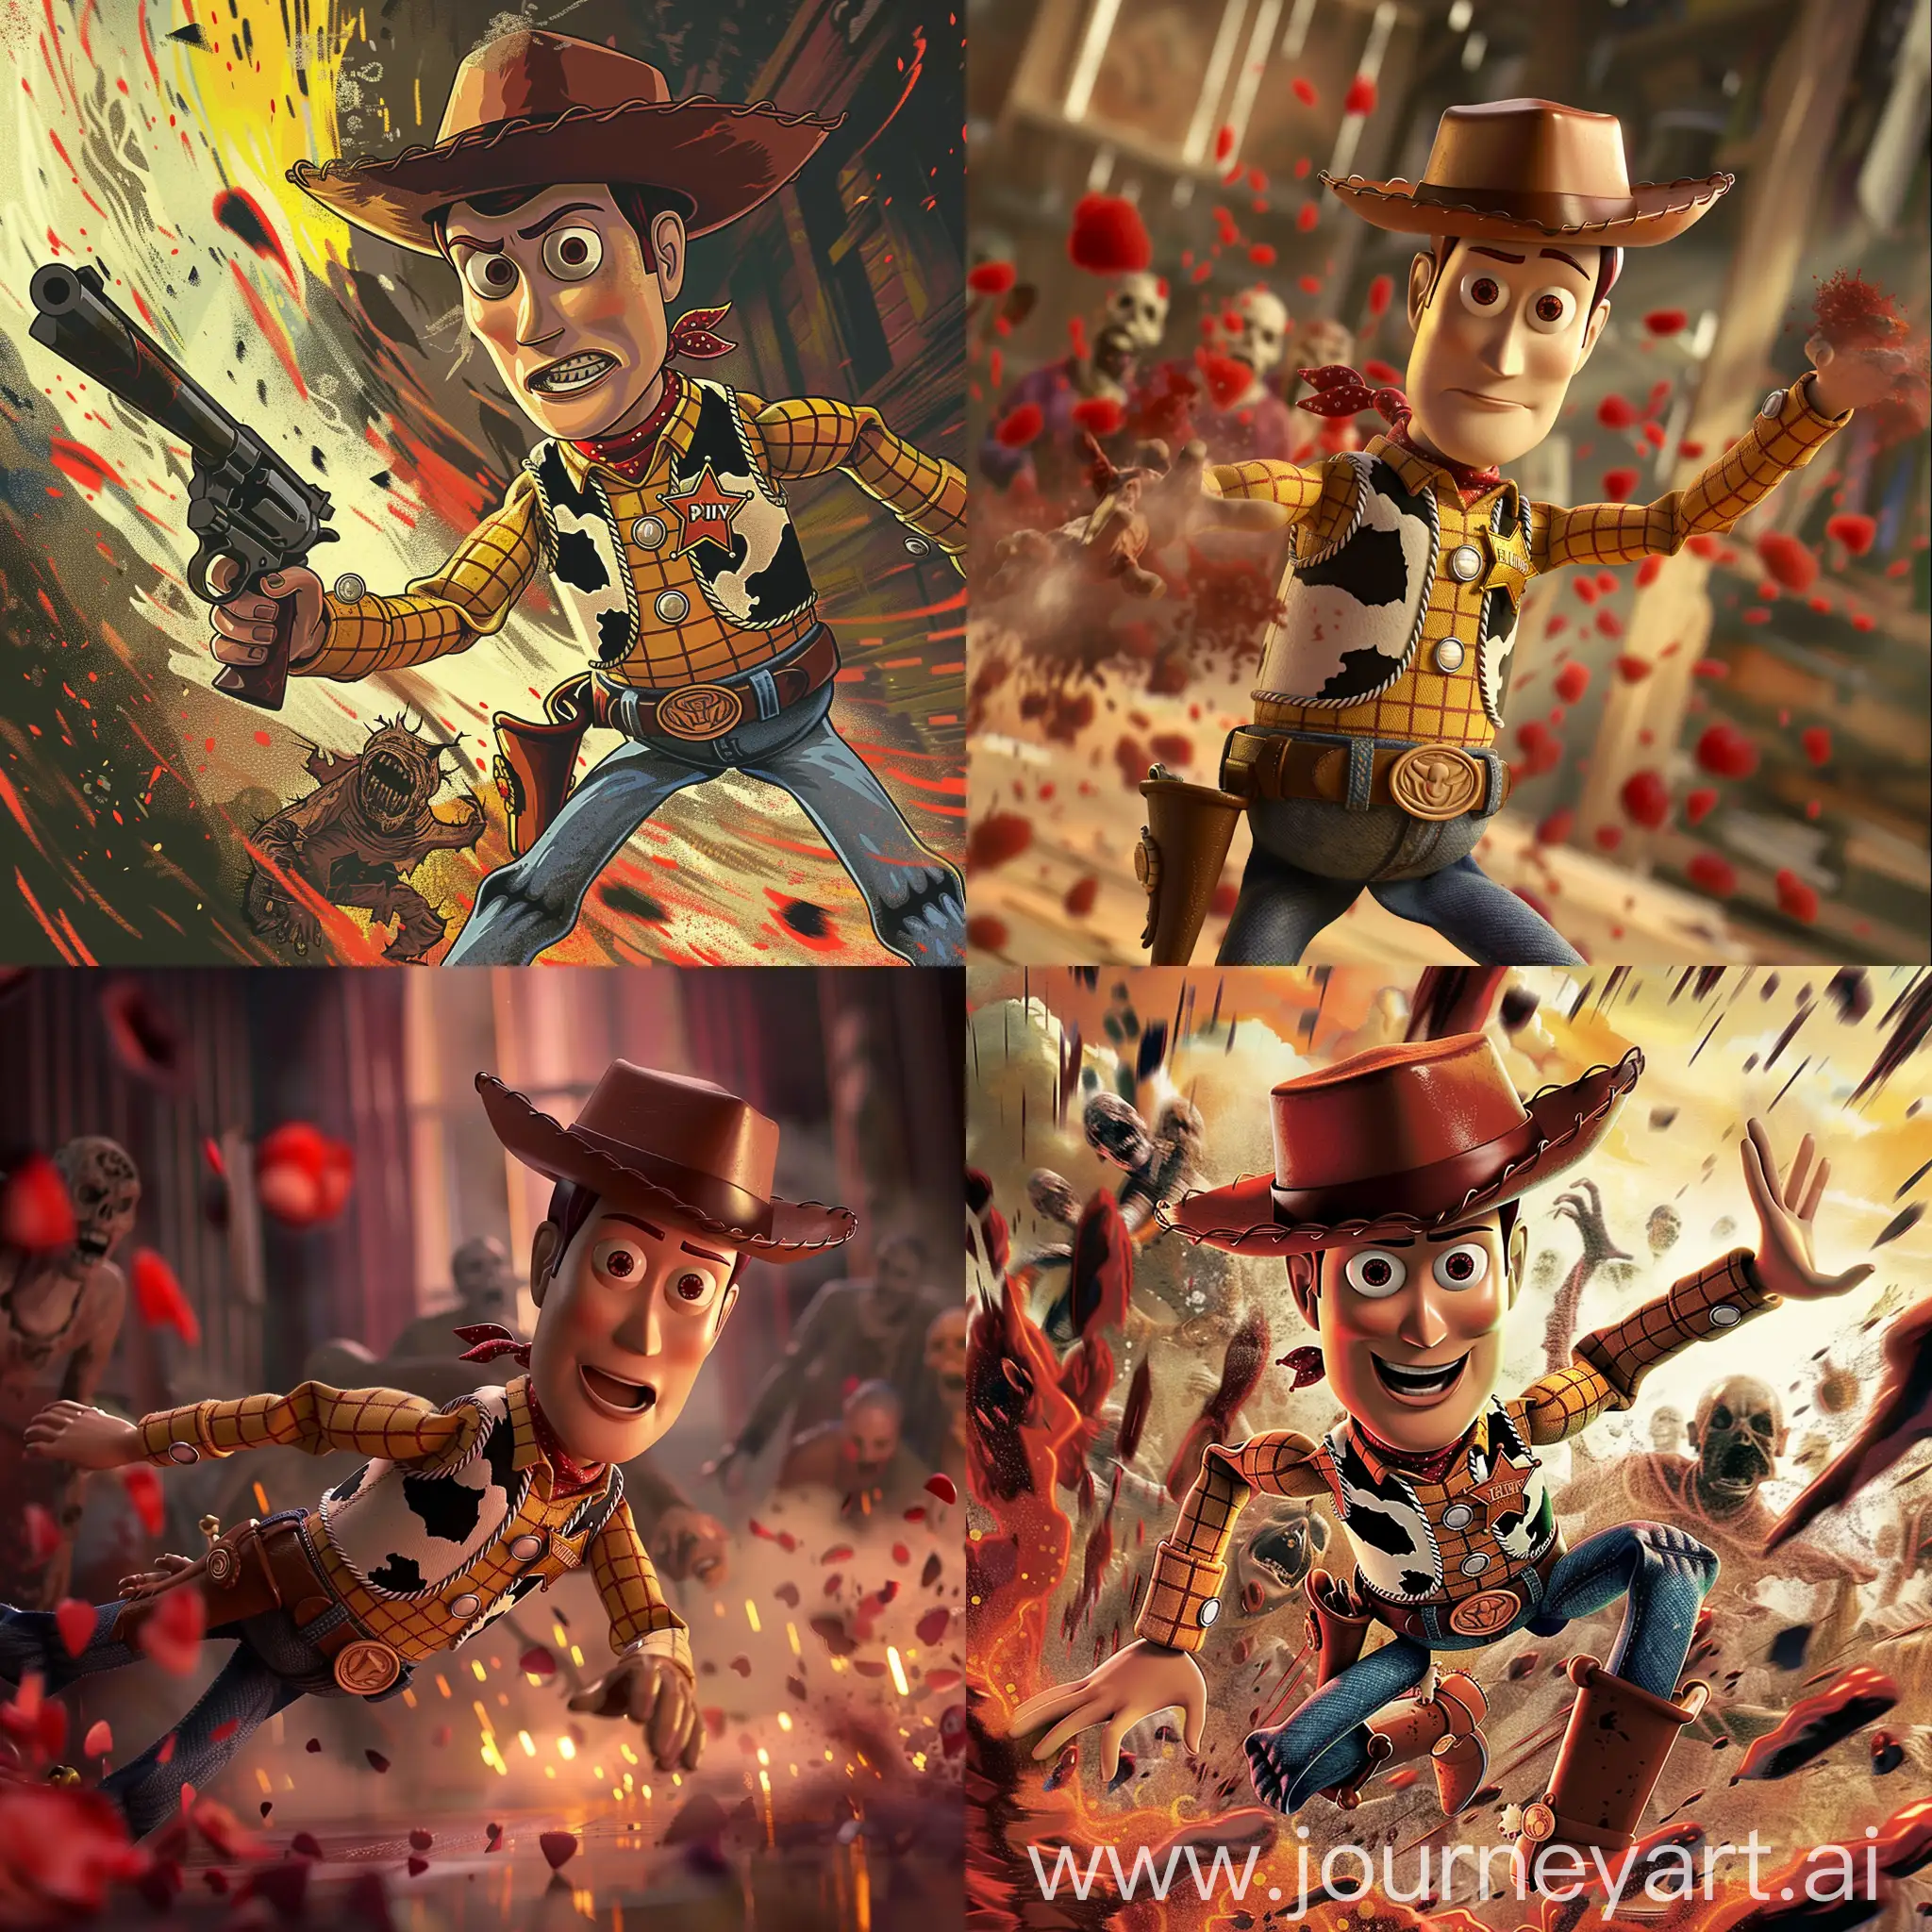 Woody from pixar fights a zombie horde